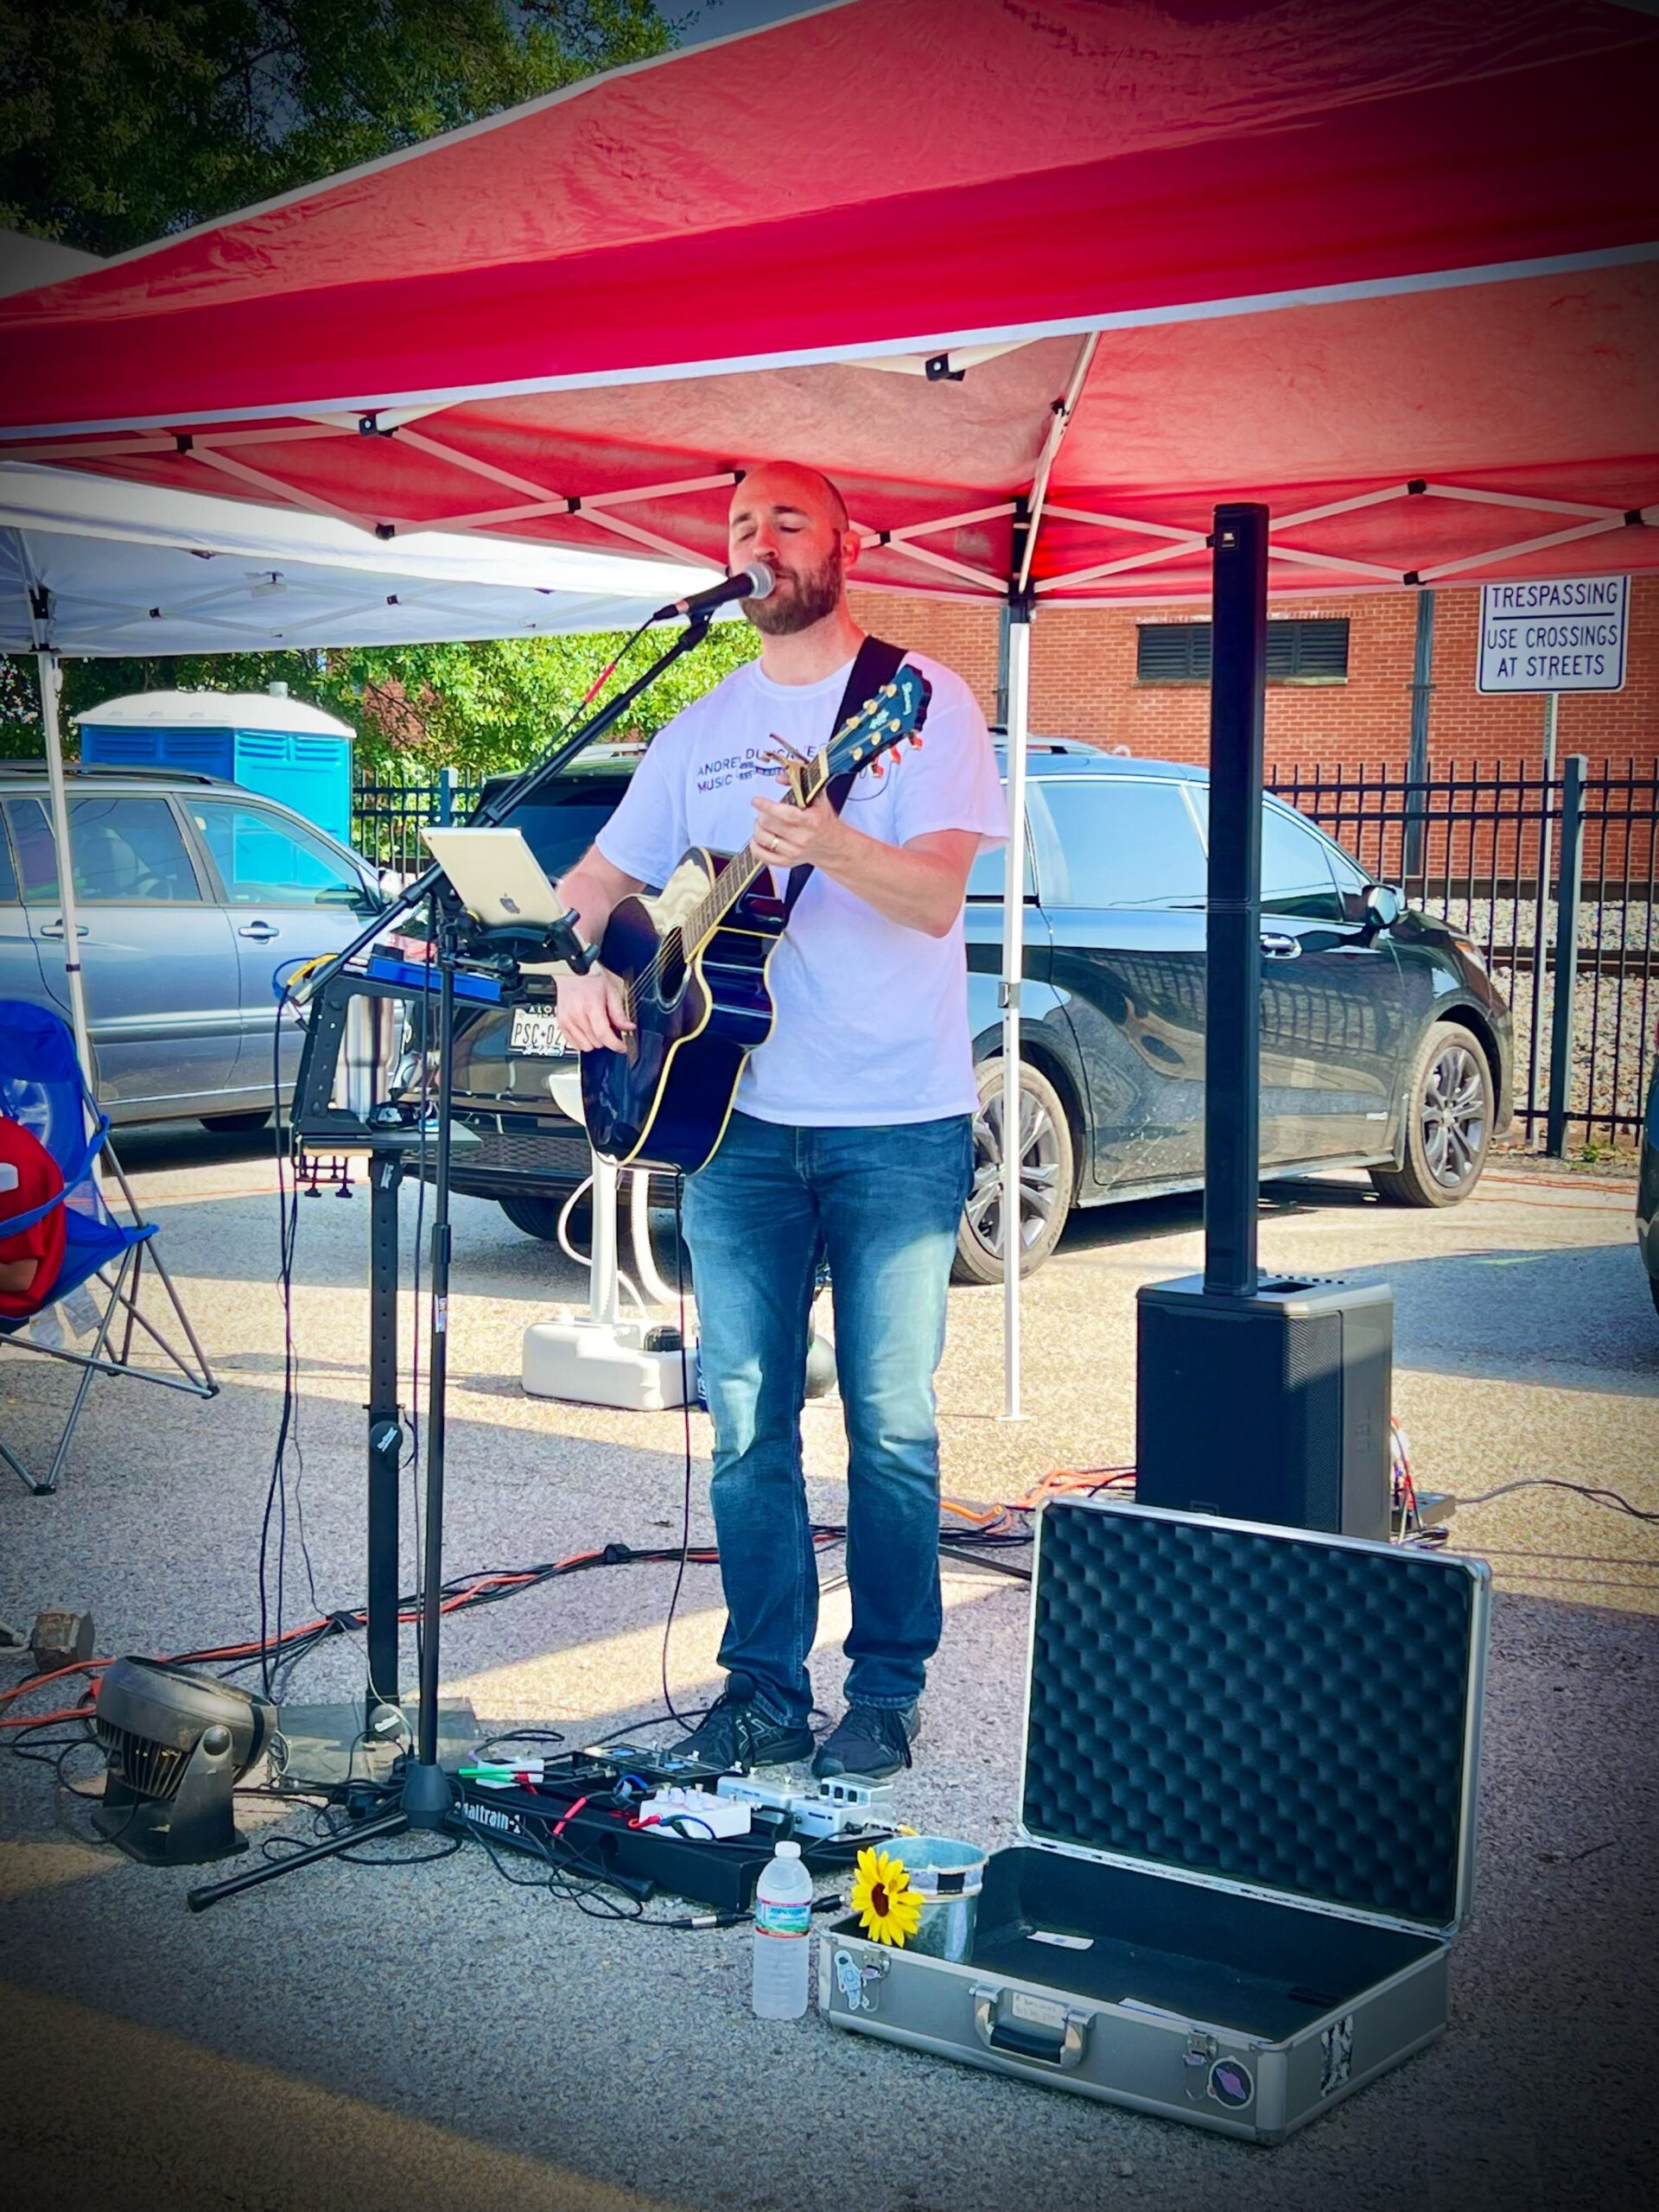 Andrew Duncalfe, playing live at Longview Farmers Market, May 7, 2022